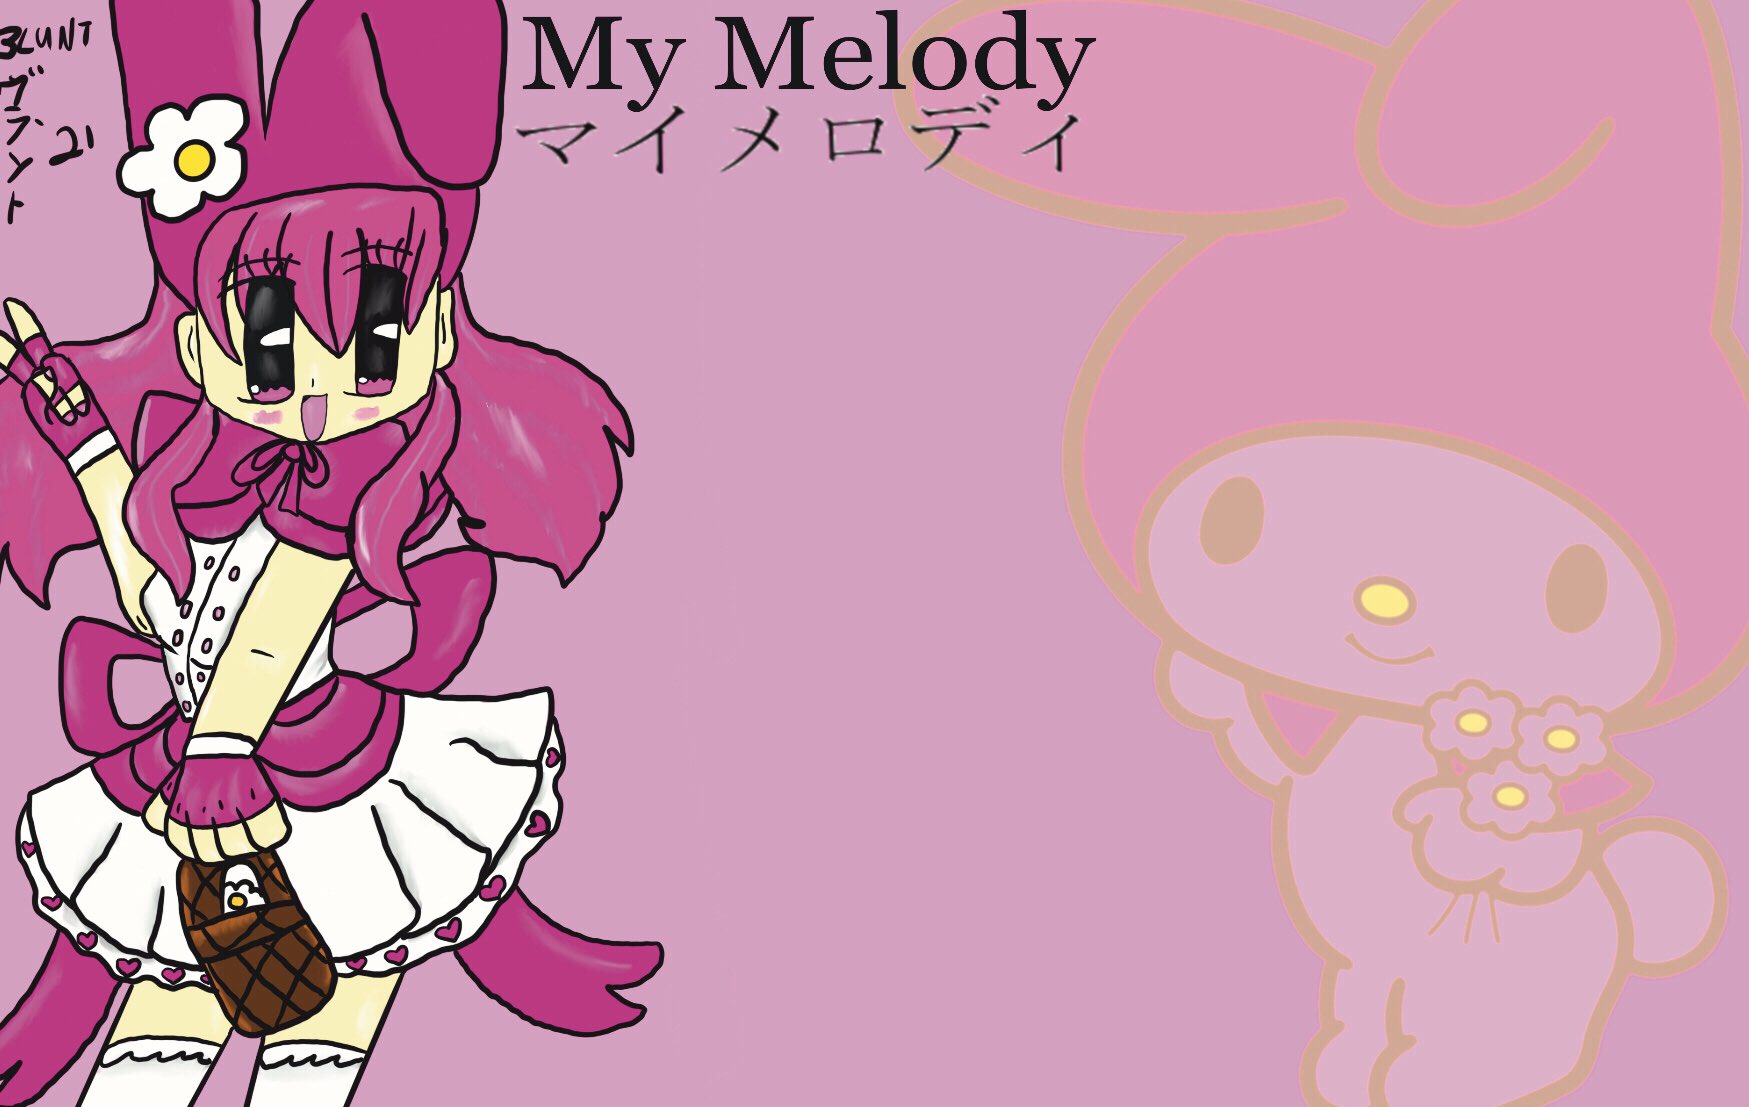 Twitter-এ BLUNT (ブラント): My Melody And Kuromi Desktop Wallpaper, Free To Use As Long As You Don't Steal Without Credit And Or Permission <3 #anime #mymelody #kuromi #desktopwallpaper #wallpaper #myart #sanrio